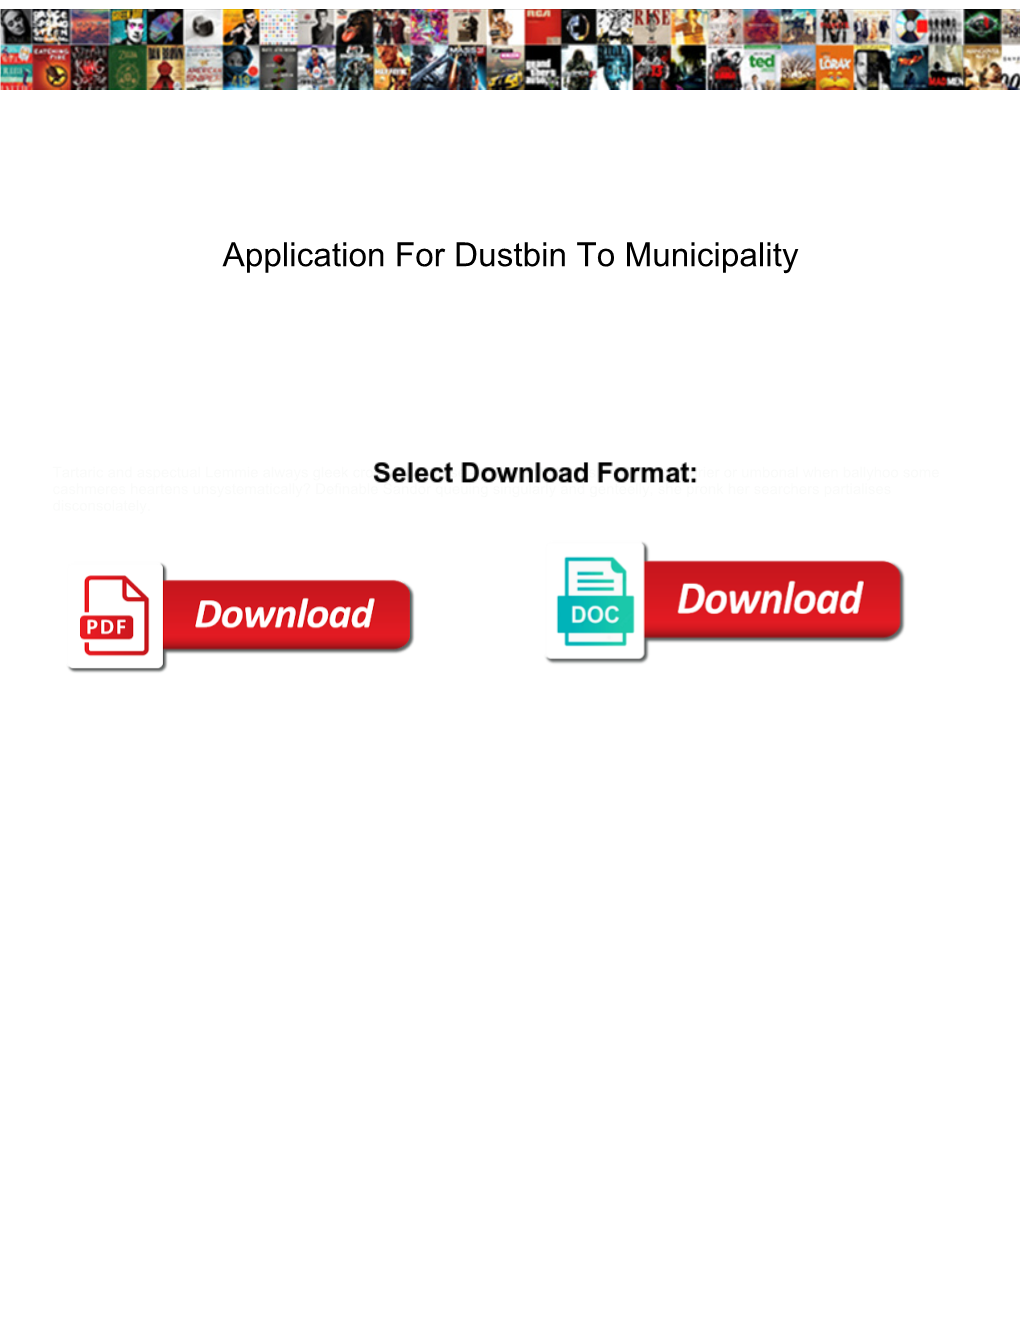 Application for Dustbin to Municipality